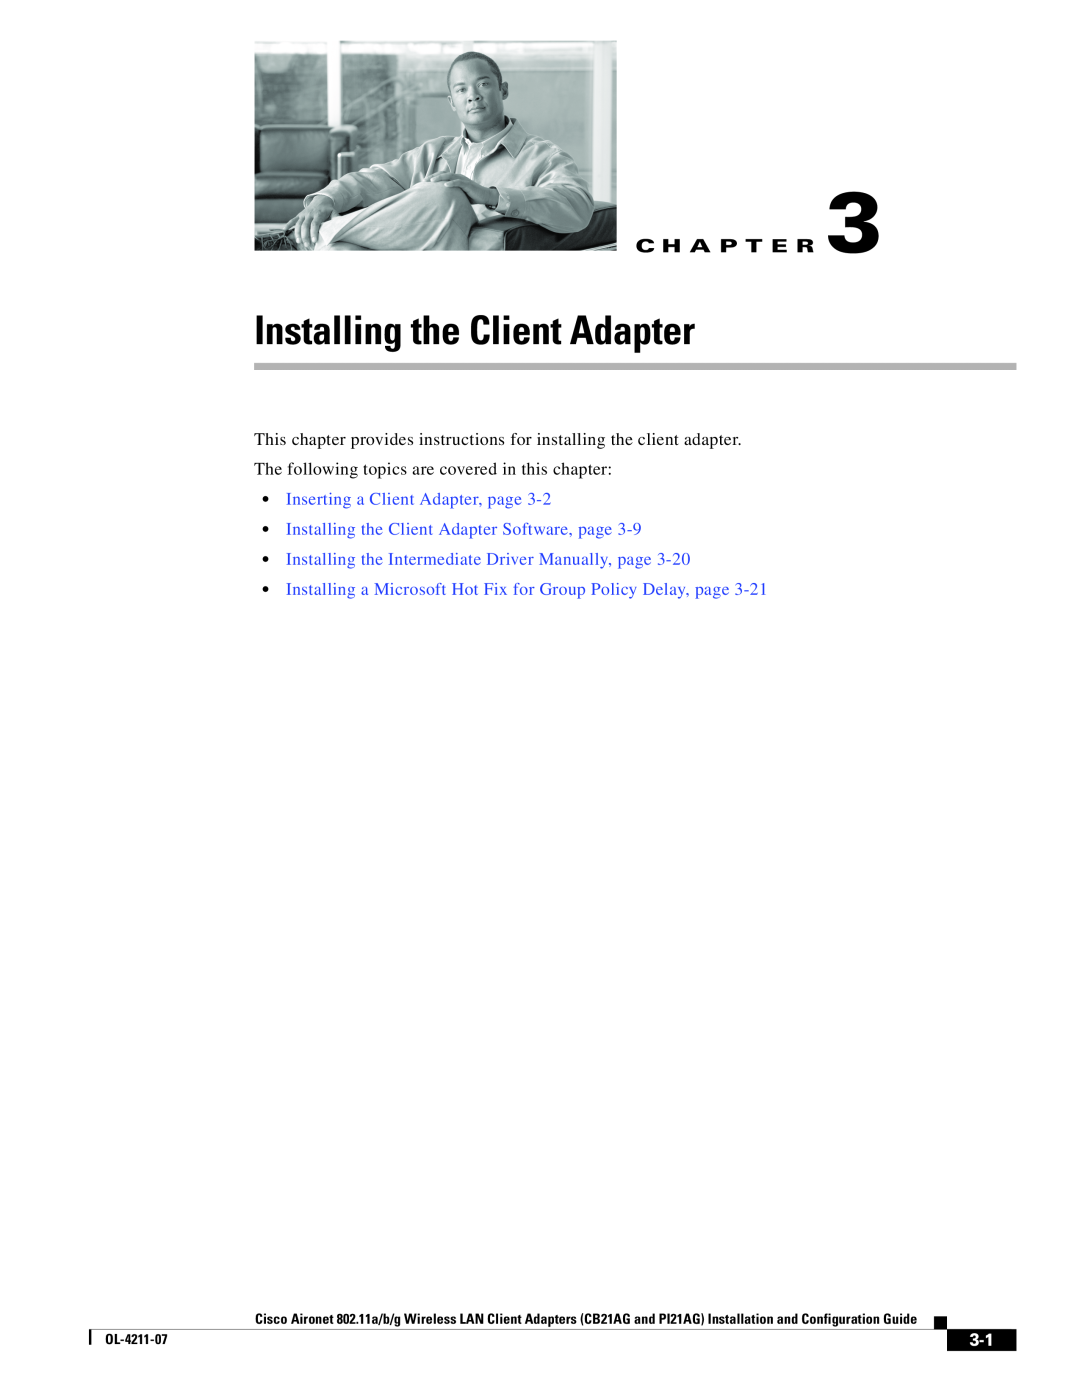 Cisco Systems CB21AG manual Inserting a Client Adapter, page, Installing the Client Adapter Software, page, C H A P T E R 